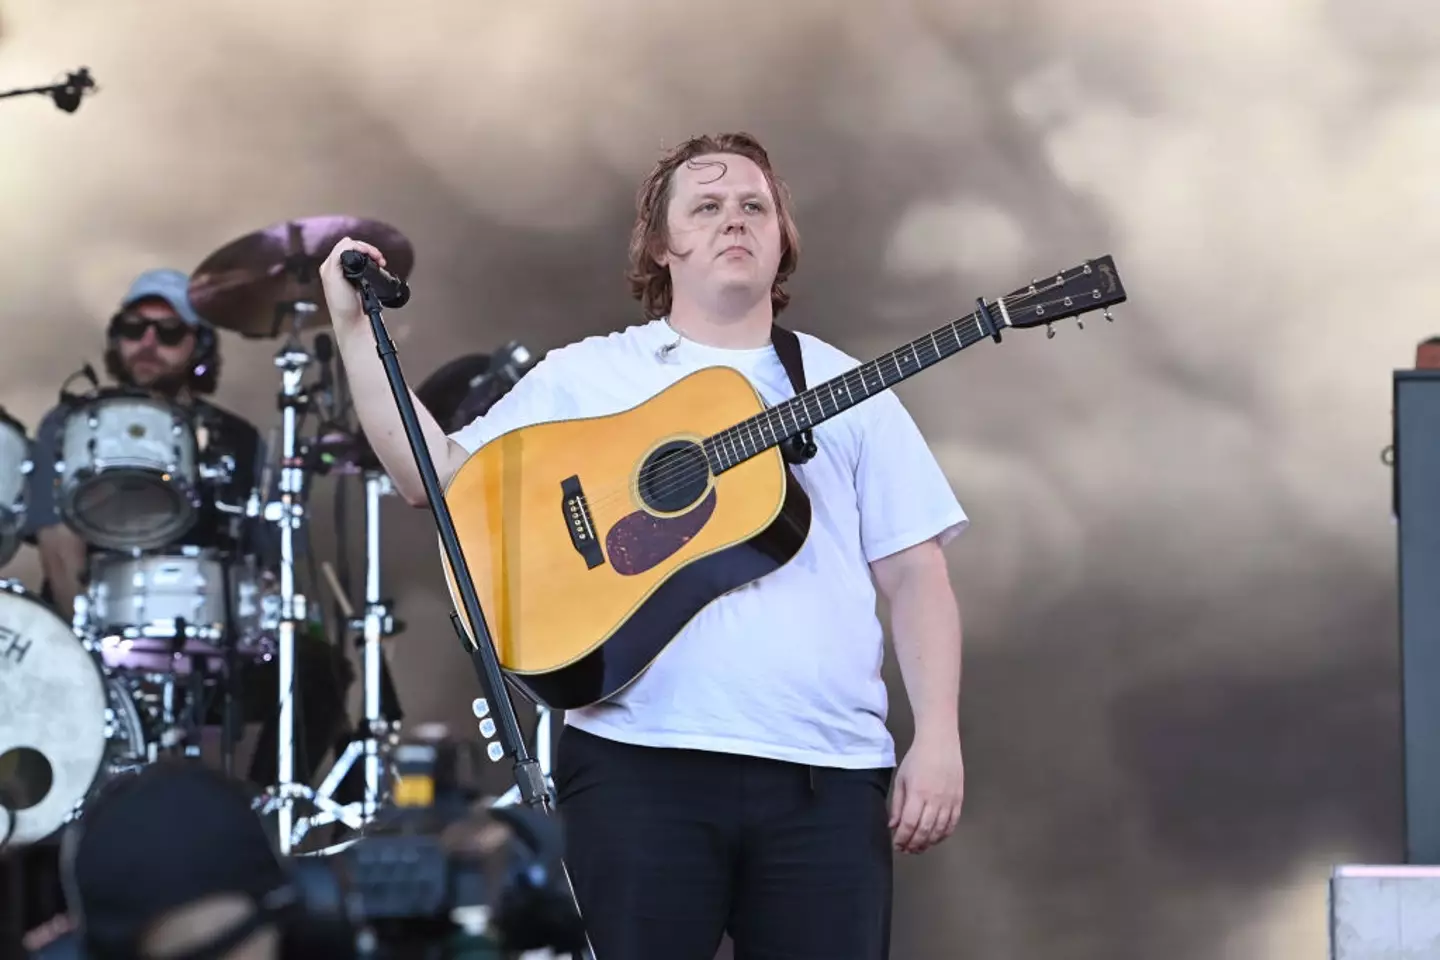 Lewis Capaldi recently announced a break from touring for 'the foreseeable future'.